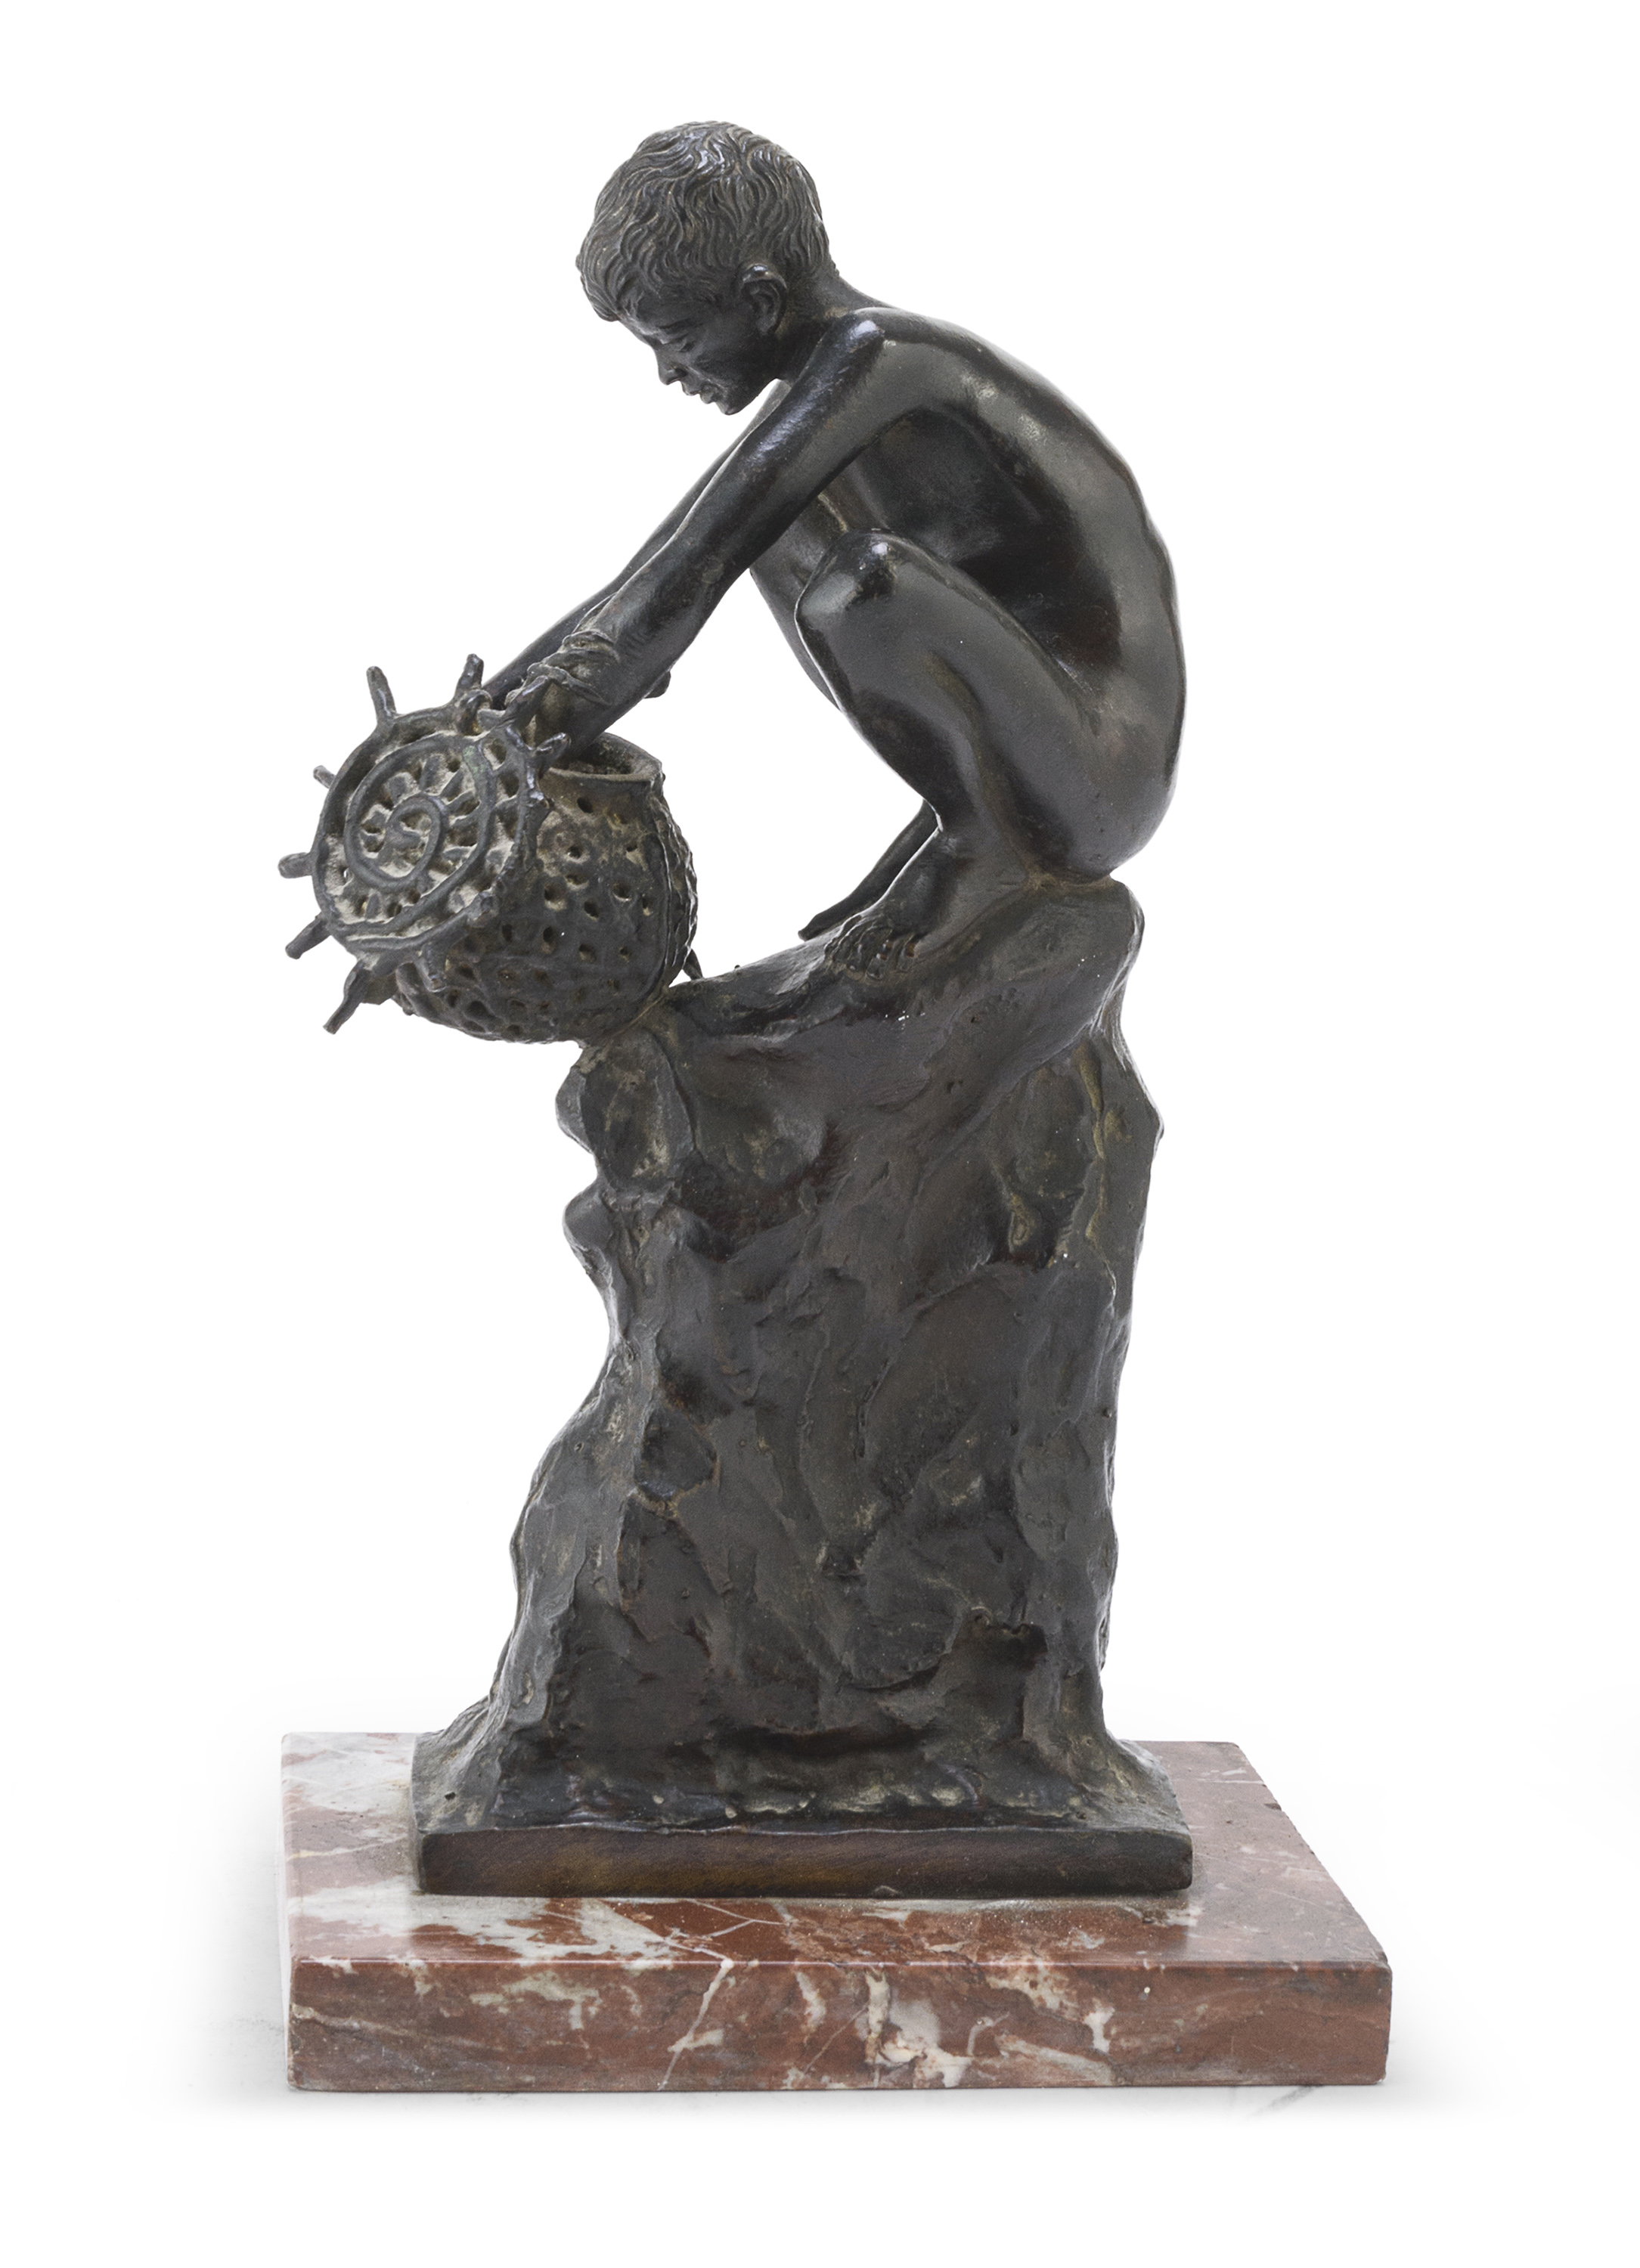 NEAPOLITAIN BRONZE SCULPTURE OF A YOUNG FISHERMAN 19TH CENTURY